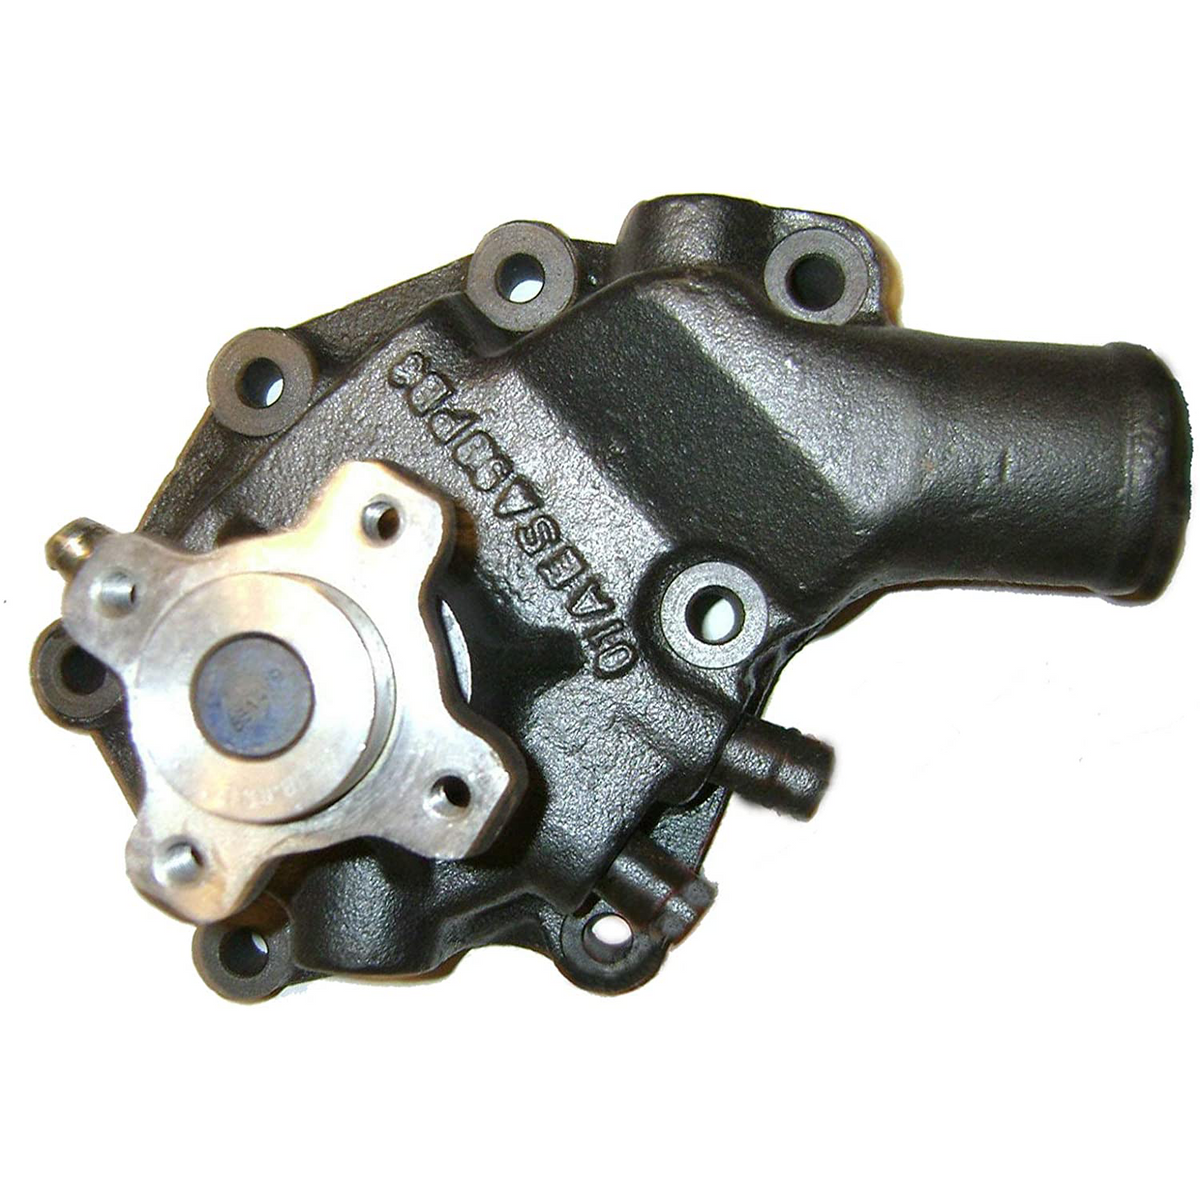 Water Pump RE19944 Fit for John Deere 2240 2440 301A 820 830 300 301 310 400 70 290D - KUDUPARTS